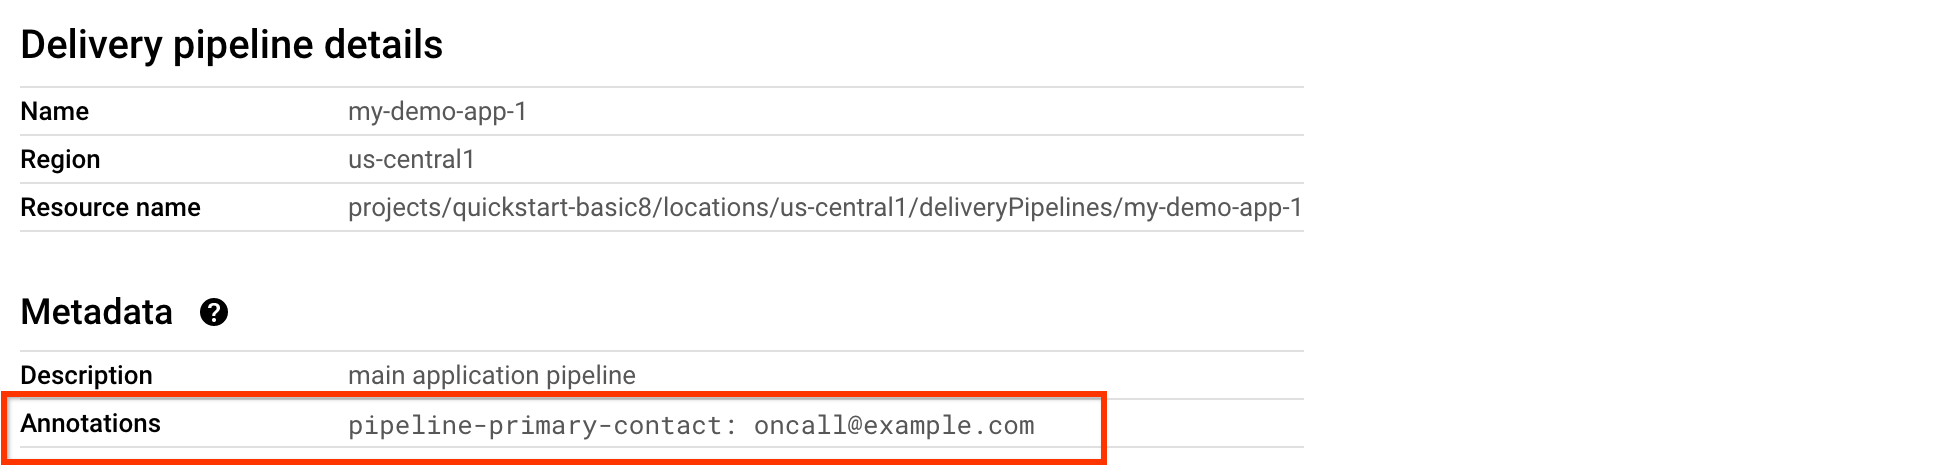 Delivery pipeline details in Google Cloud console 